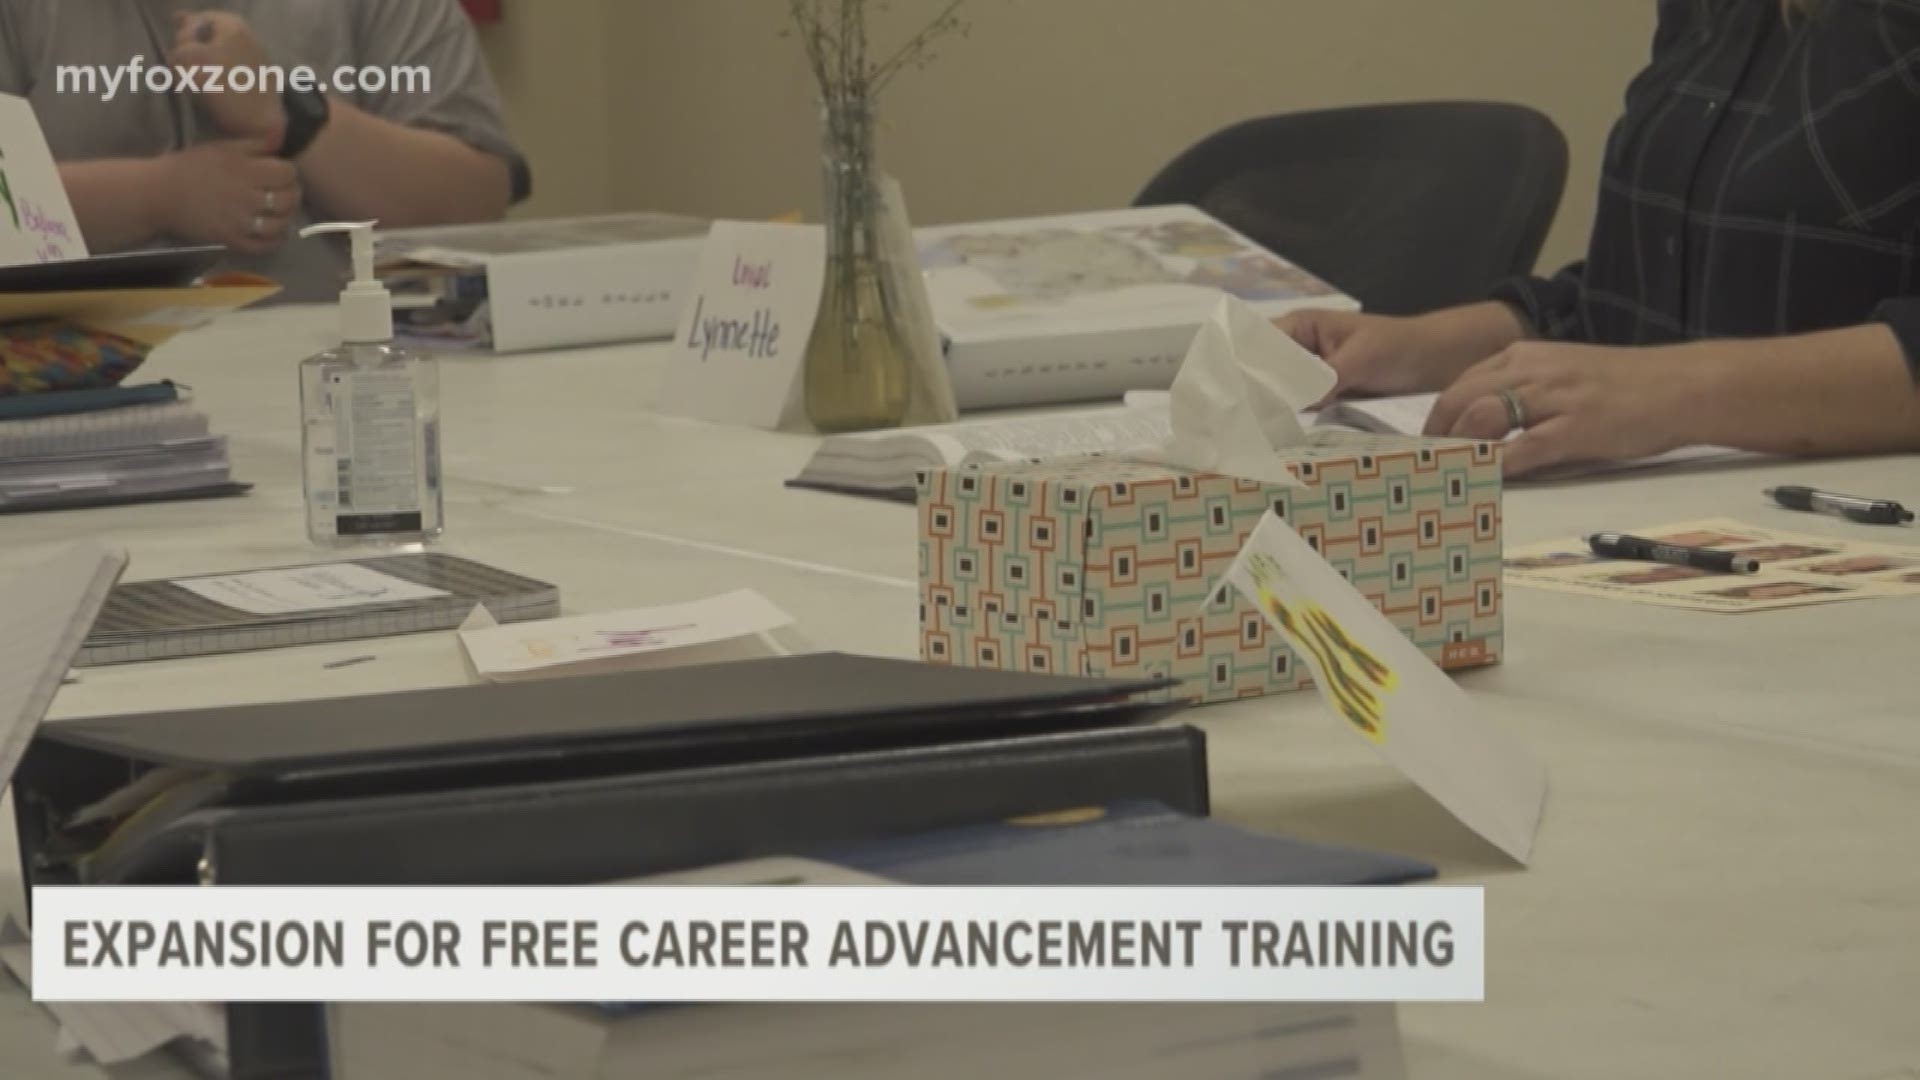 The nonprofit has been changing the lives of many by offering free training to find the perfect job.